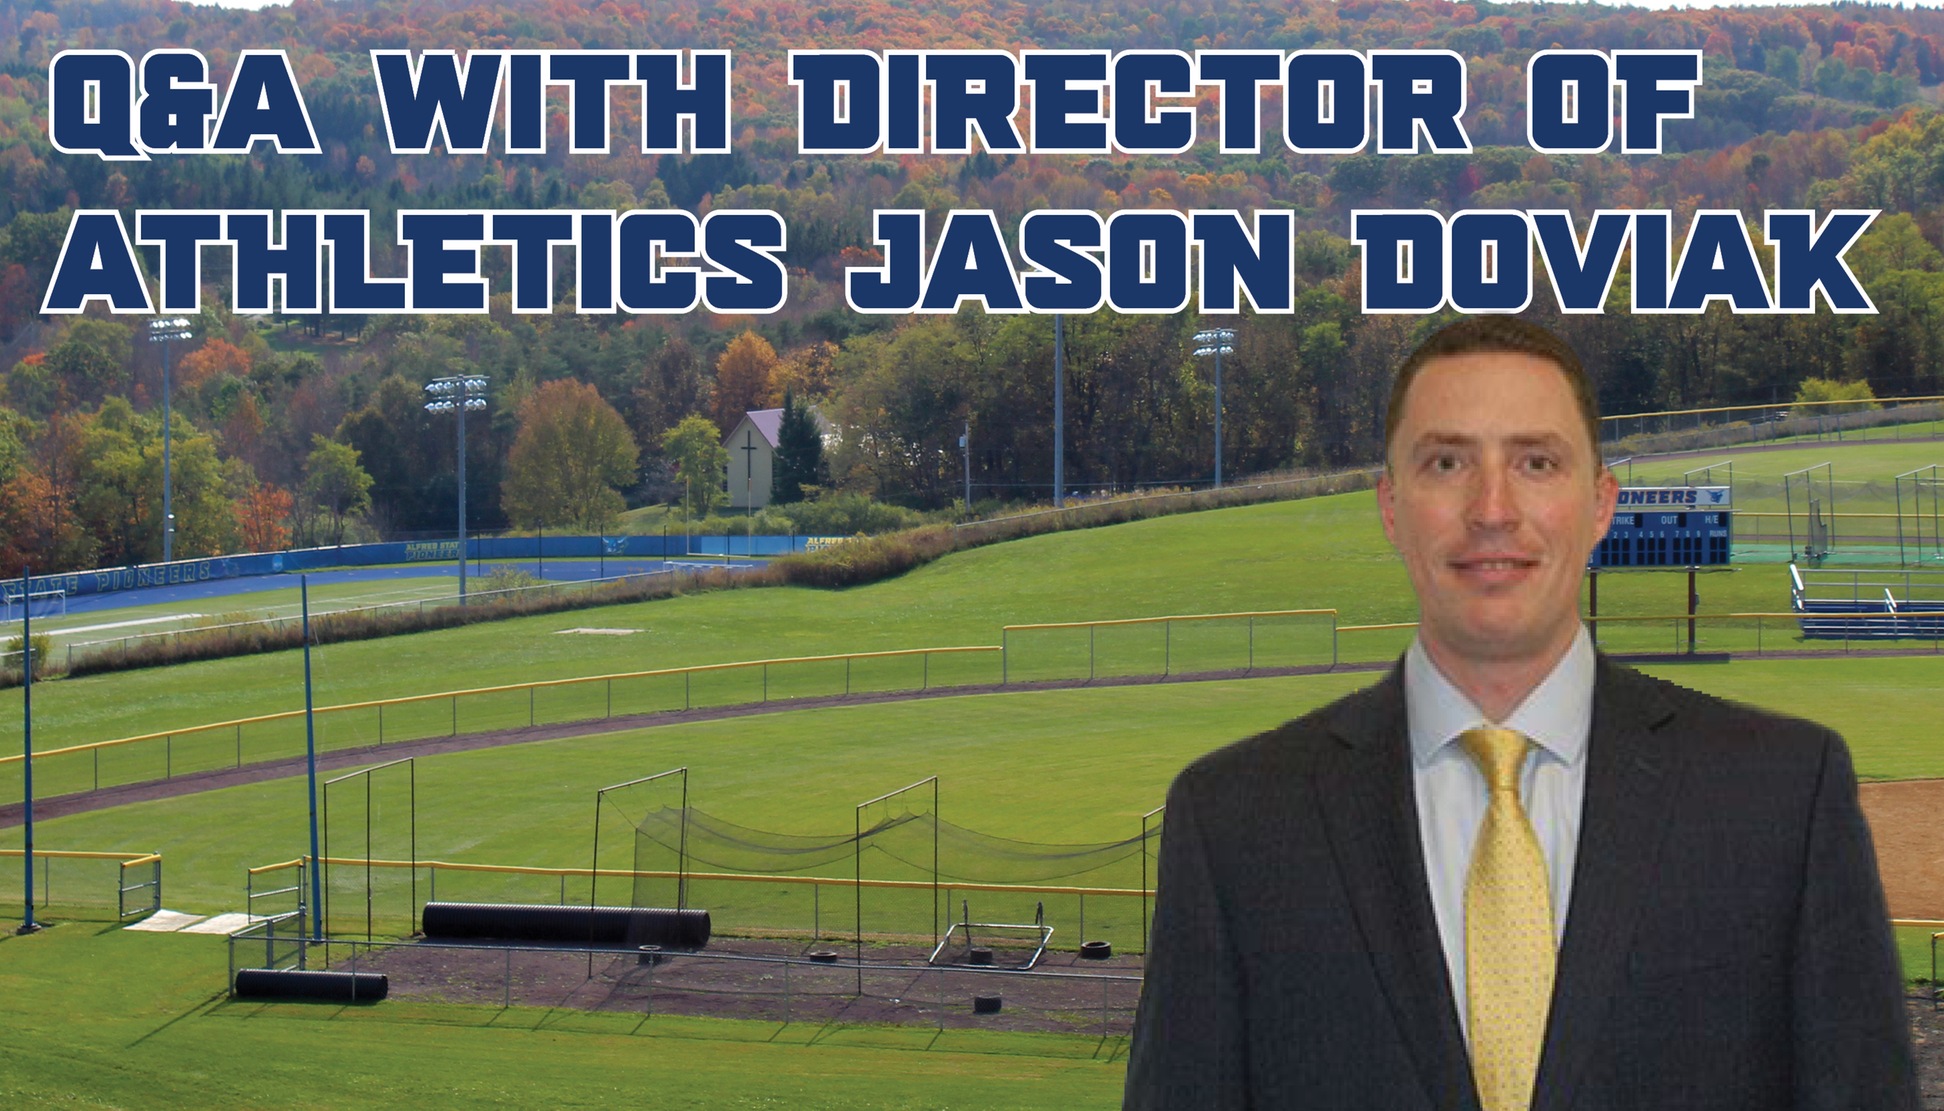 Q&A with Jason Doviak - featuring an image of Pioneer athletic facilities and a headshot of Doviak.